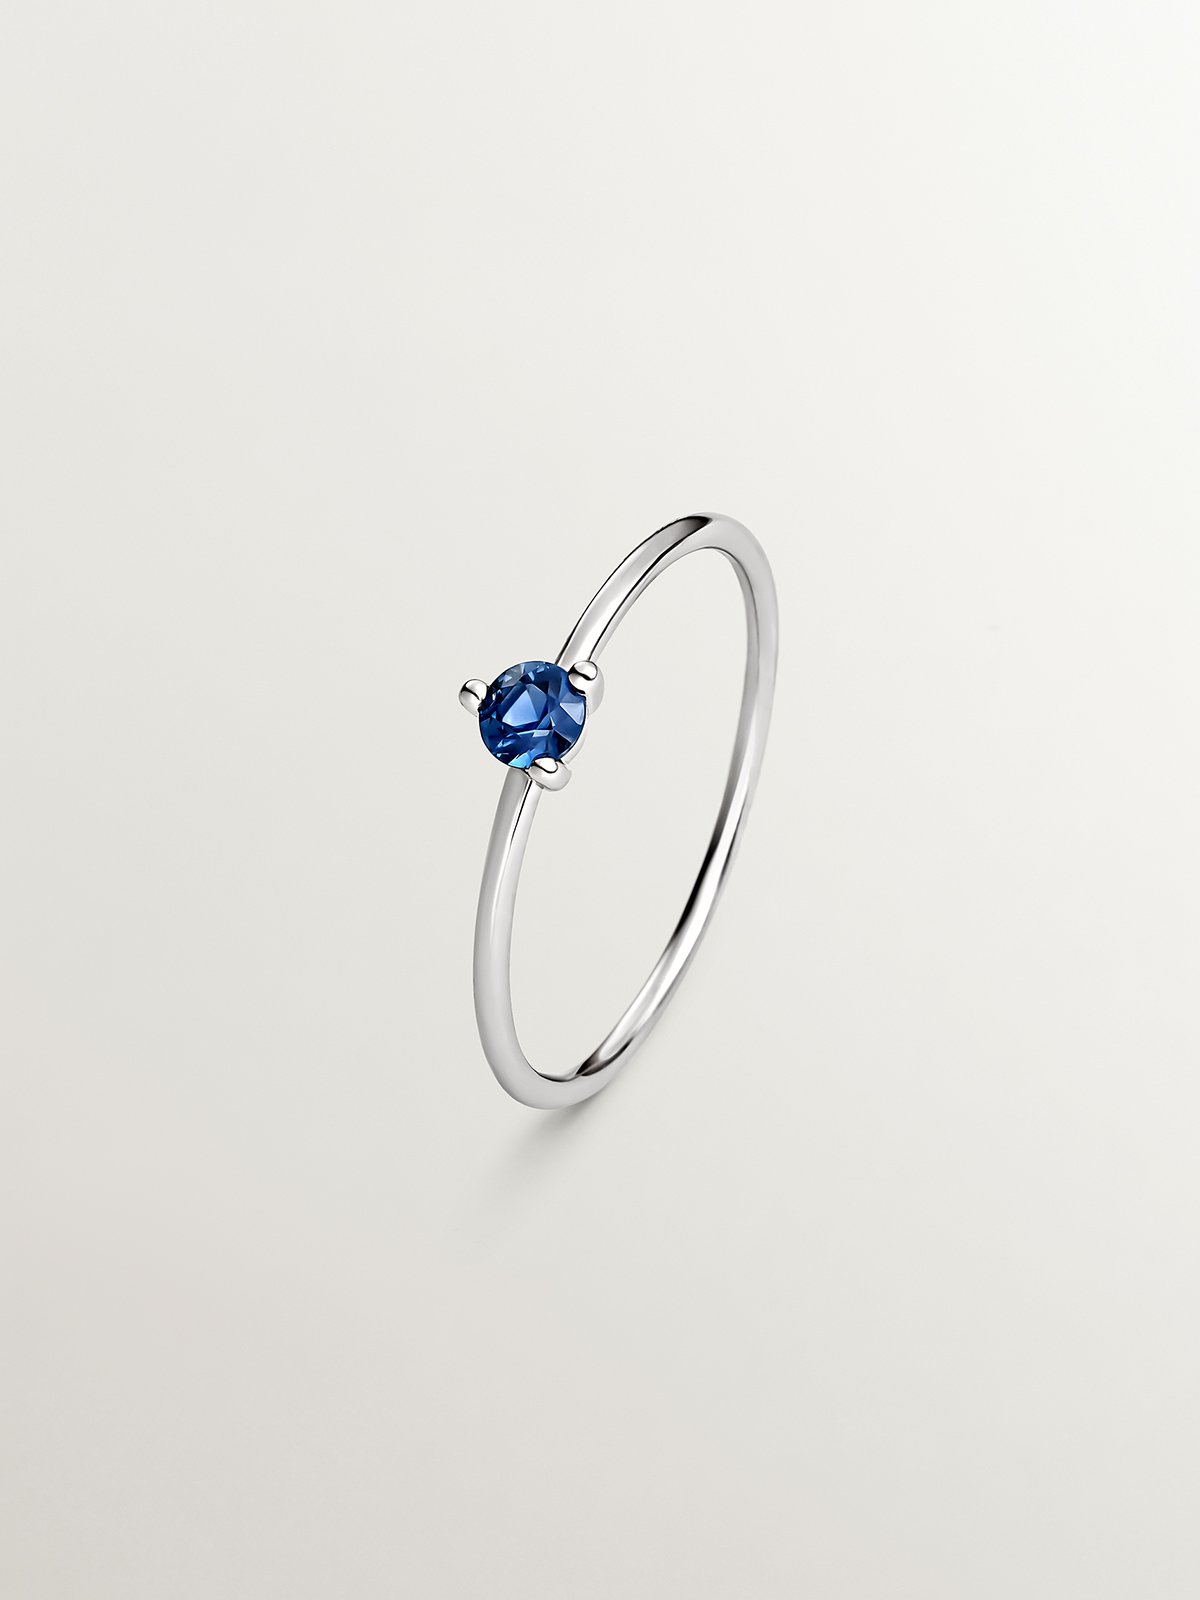 9K White Gold Ring with Blue Sapphire